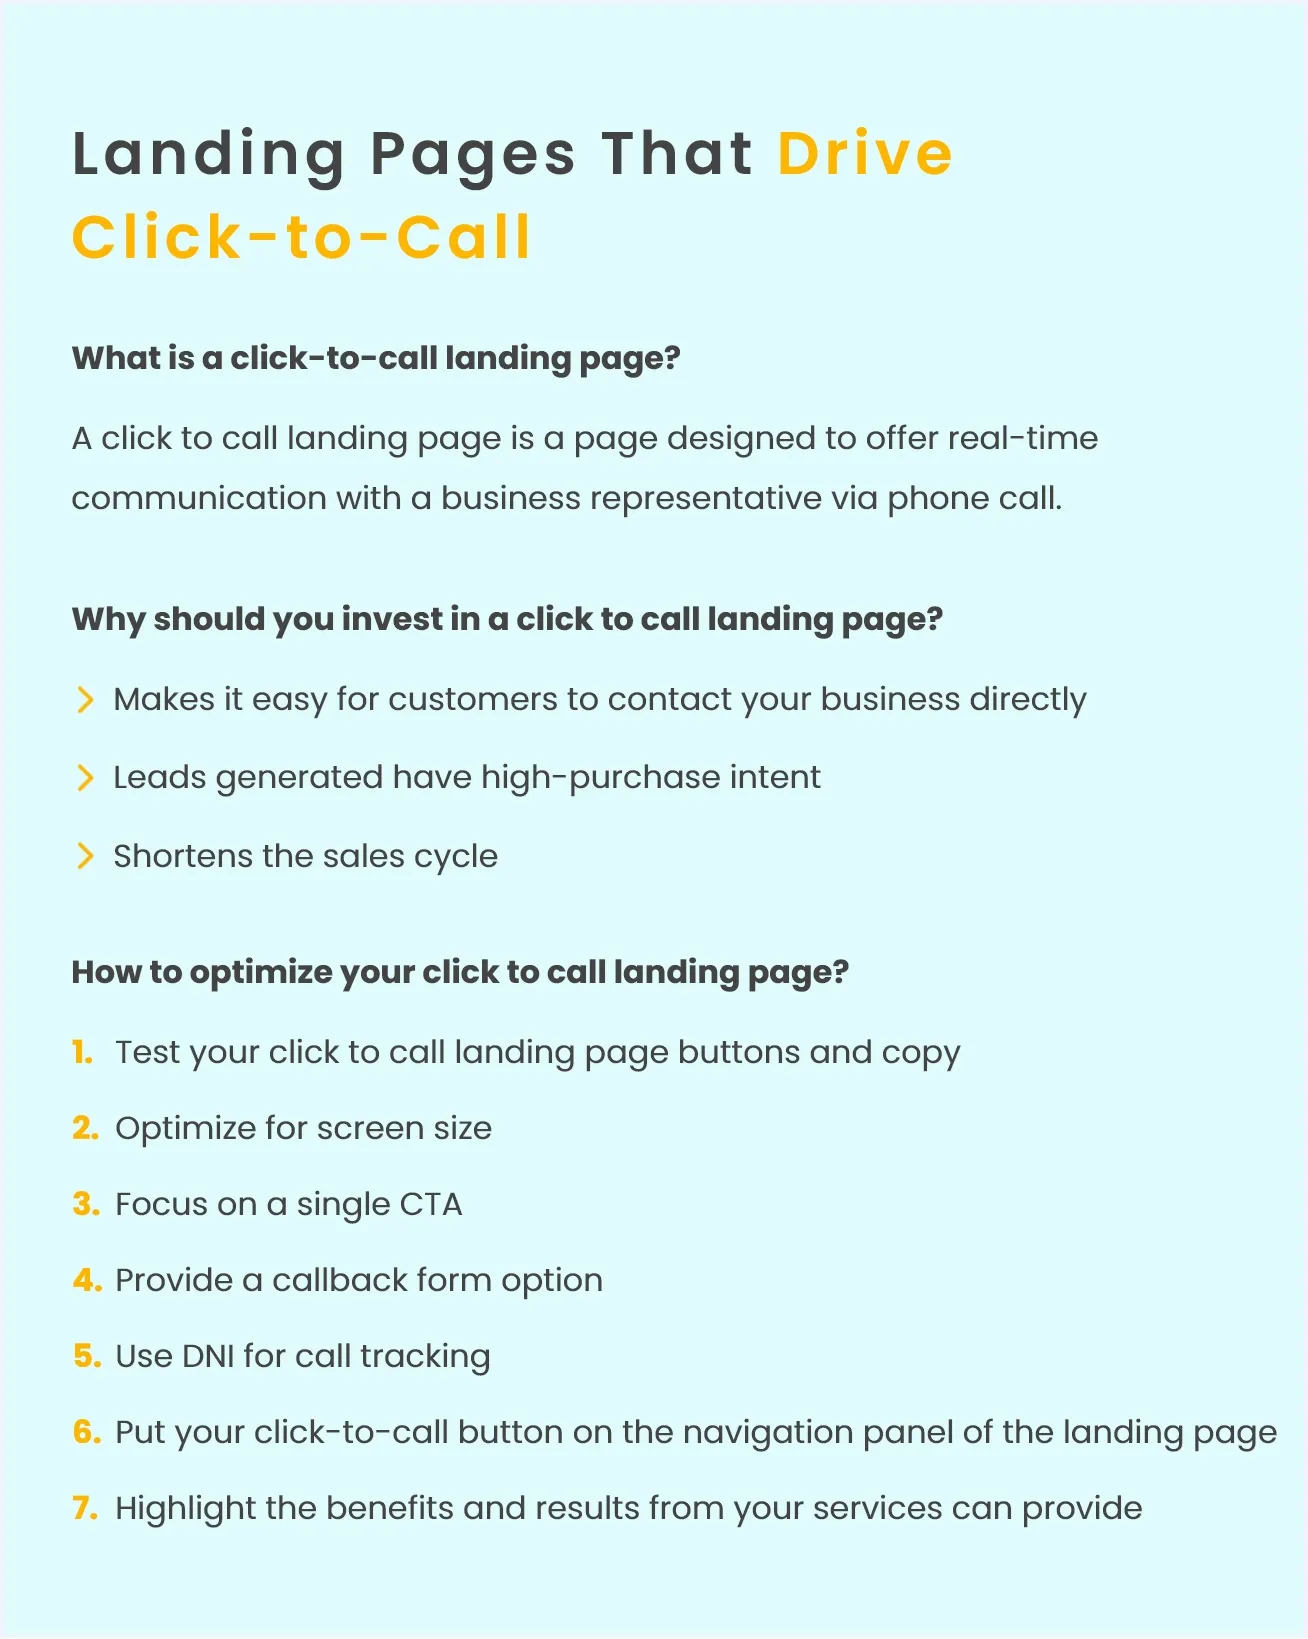 click-to-call-landing-page-summary